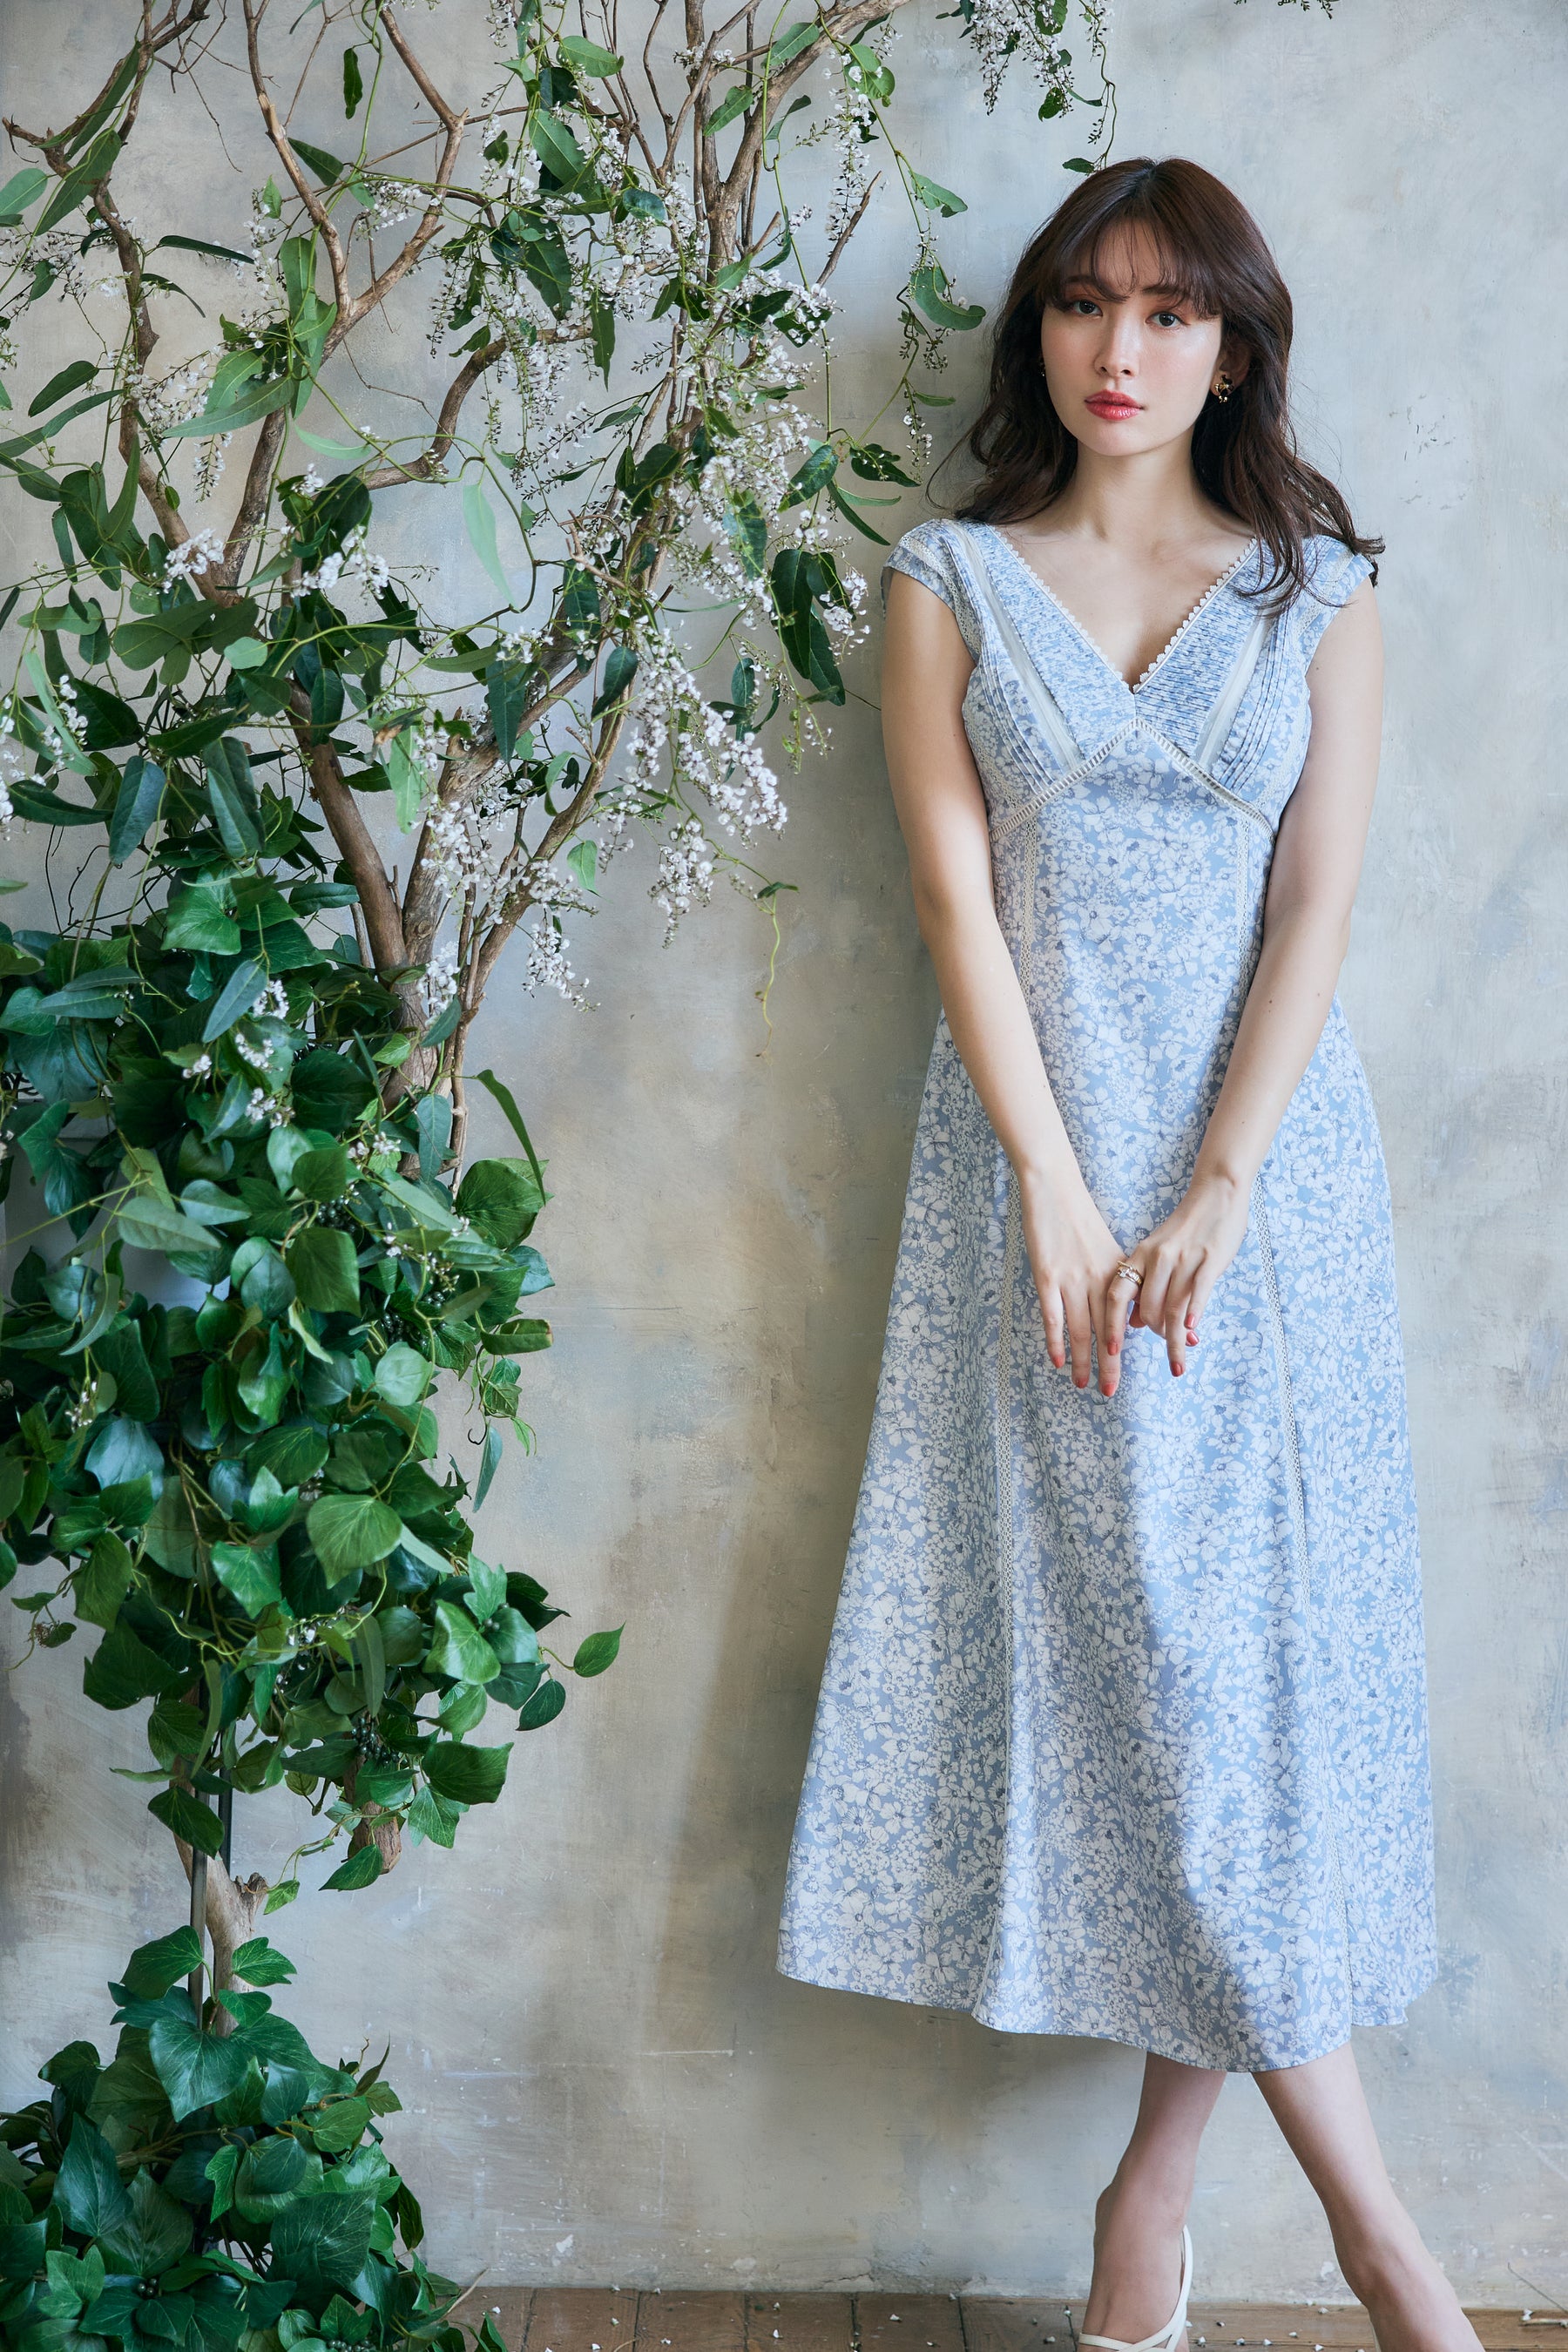 Her lip to vivienne floral lace dress柄デザイン花柄